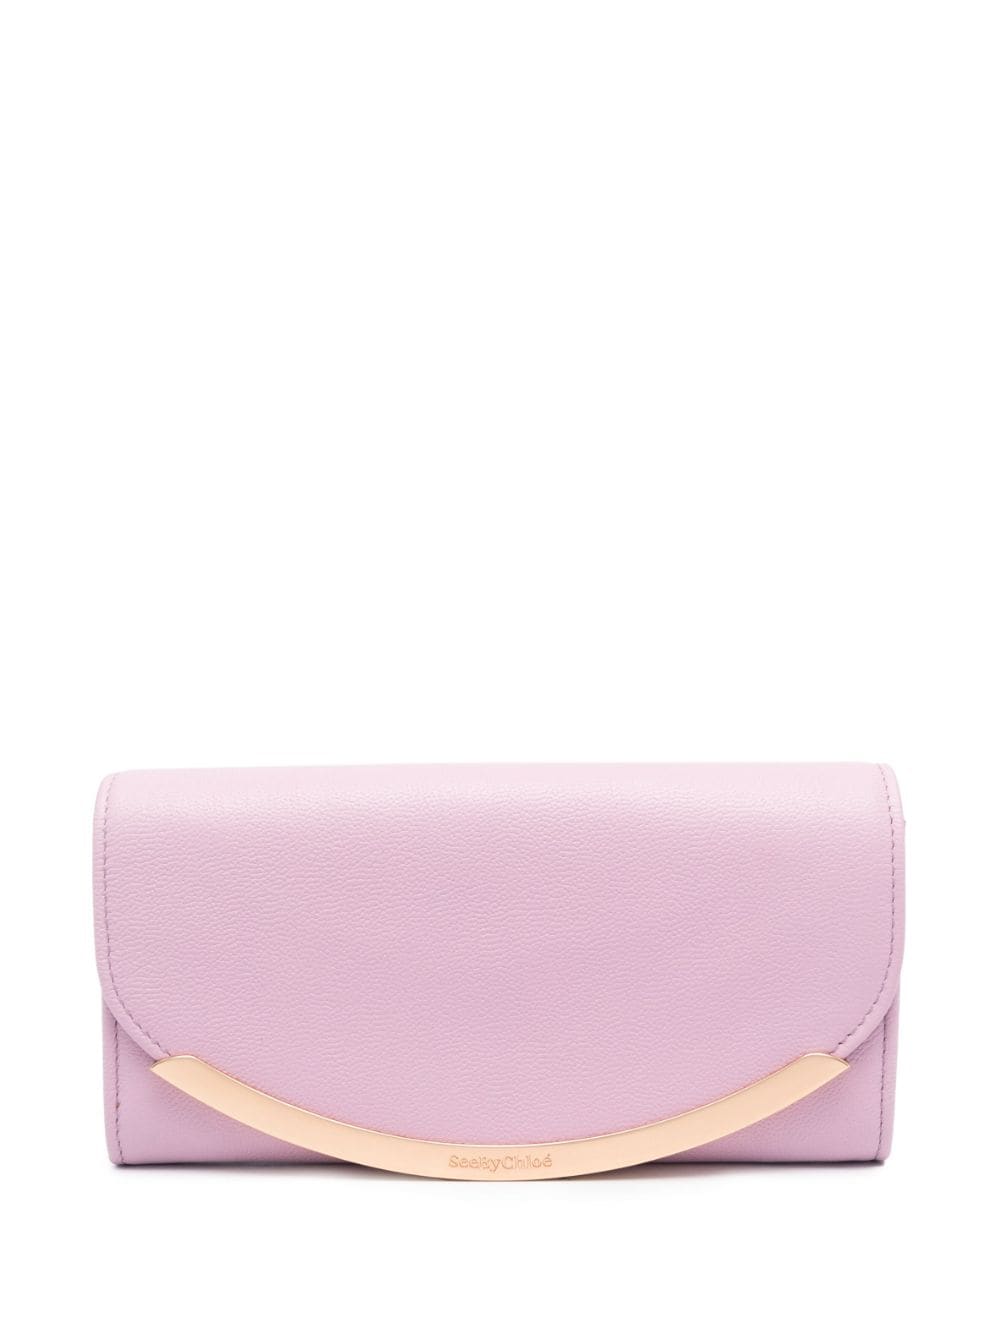 See By Chloé Lizzie Leather Long Wallet - Farfetch